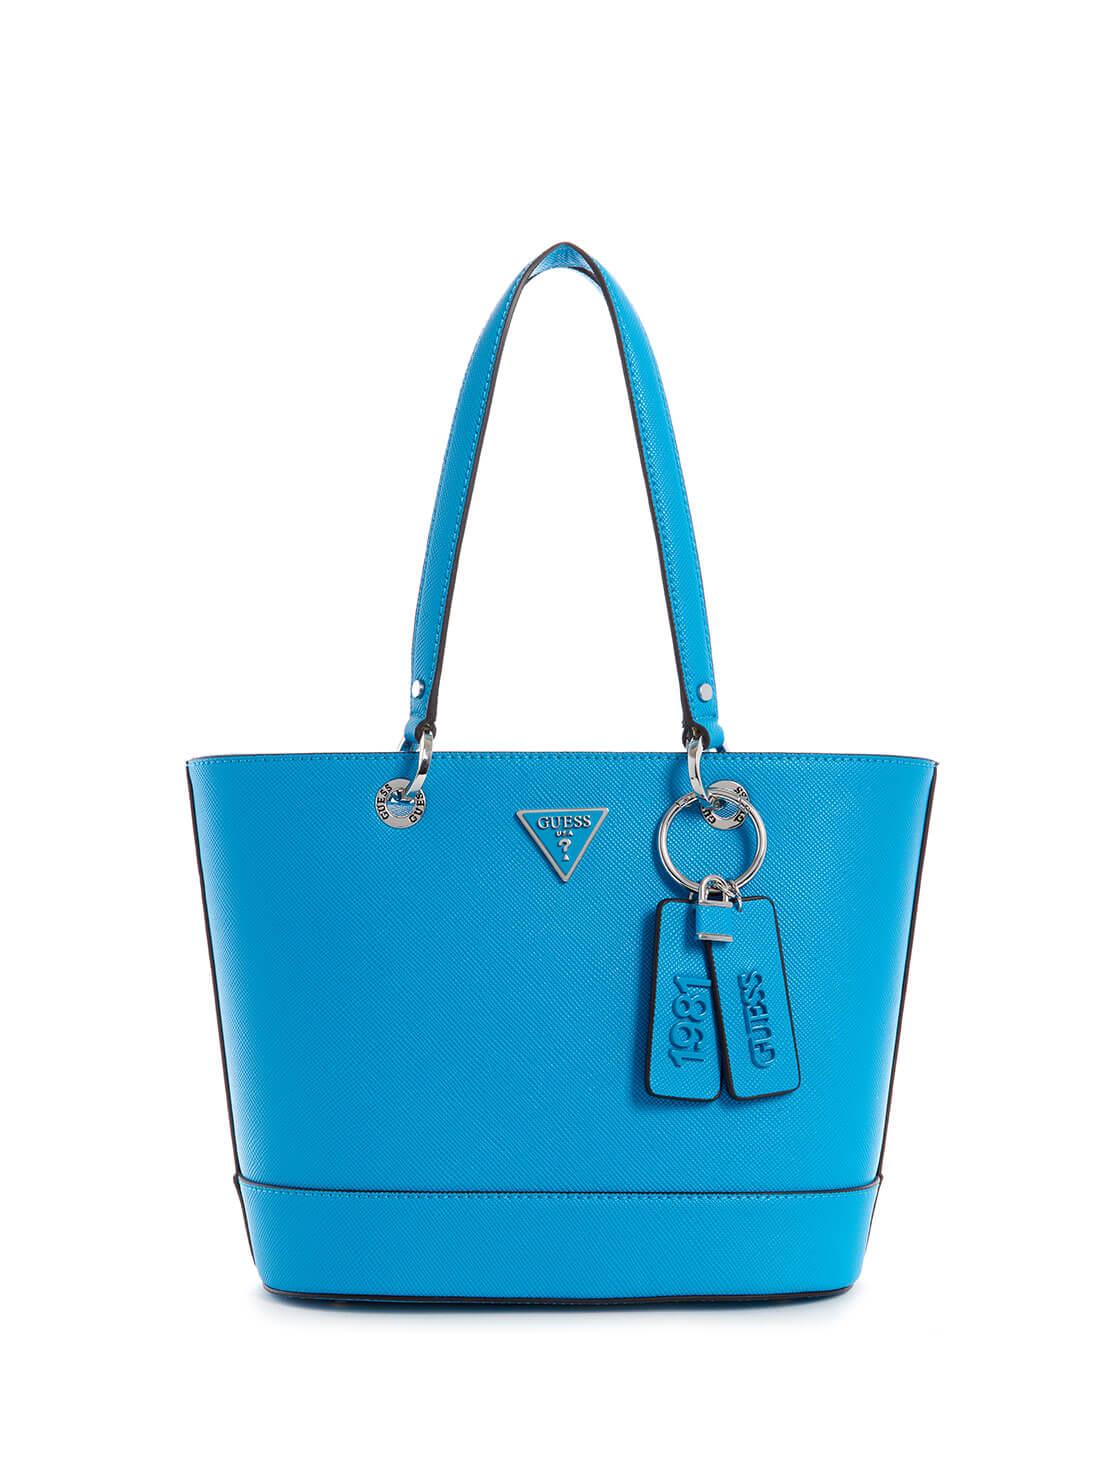 Blue Noelle Small Elite Tote Bag - GUESS